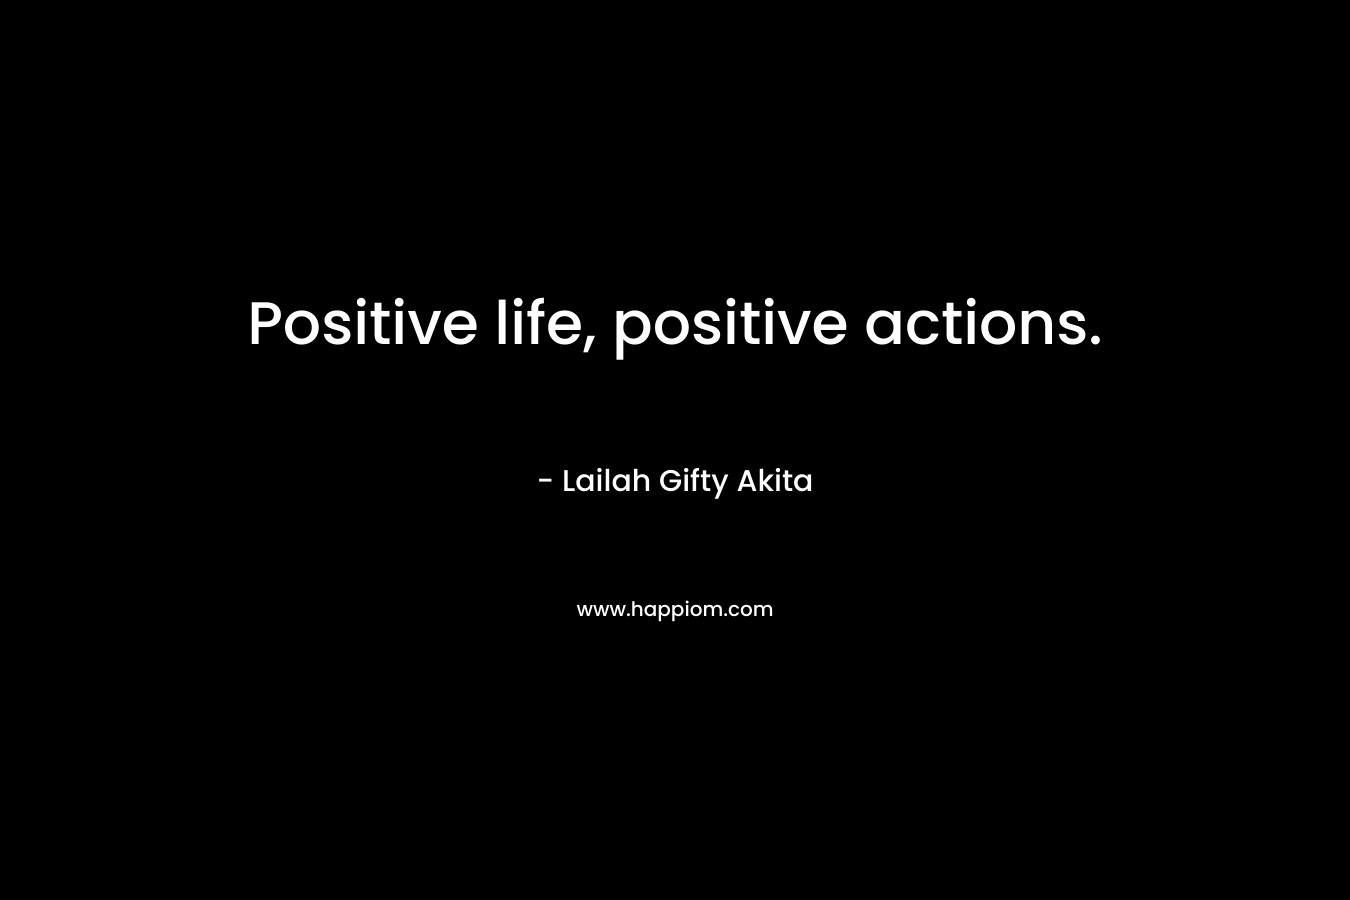 Positive life, positive actions.